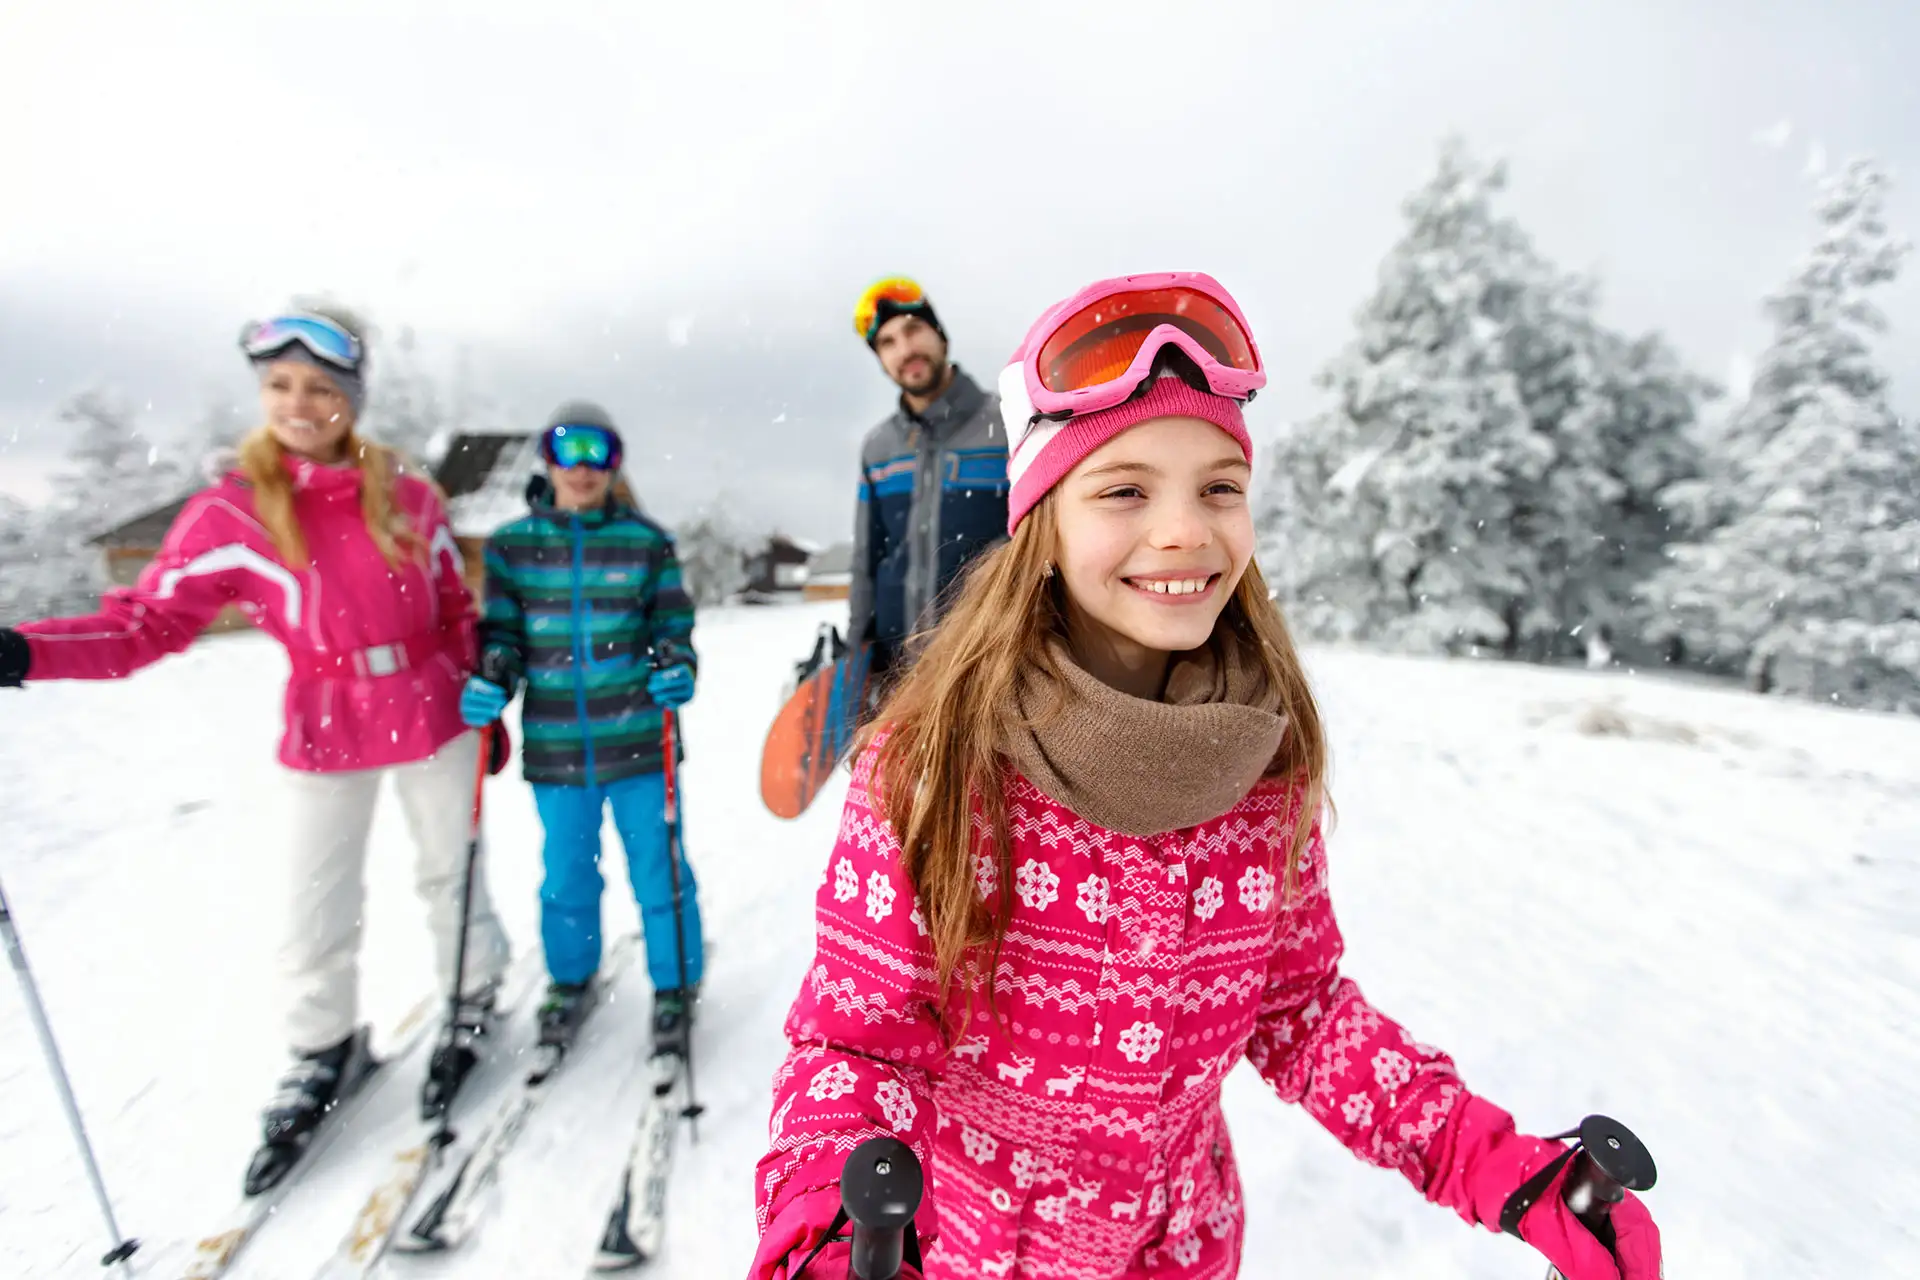 A family skiing.; Courtesy of Lucky Business/Shutterstock.com